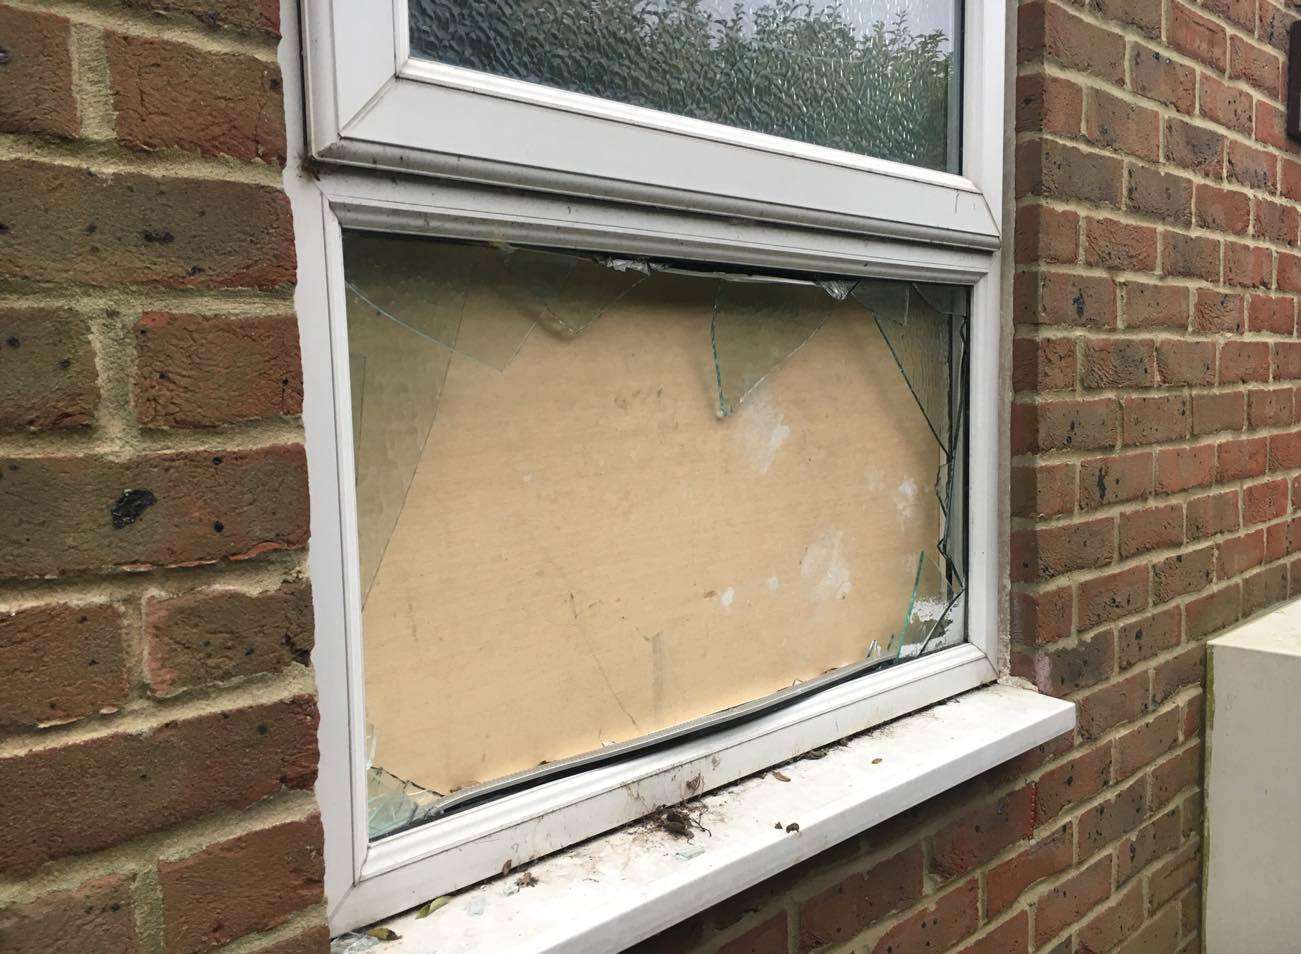 Mr Allen's window was smashed in and his home was broken into